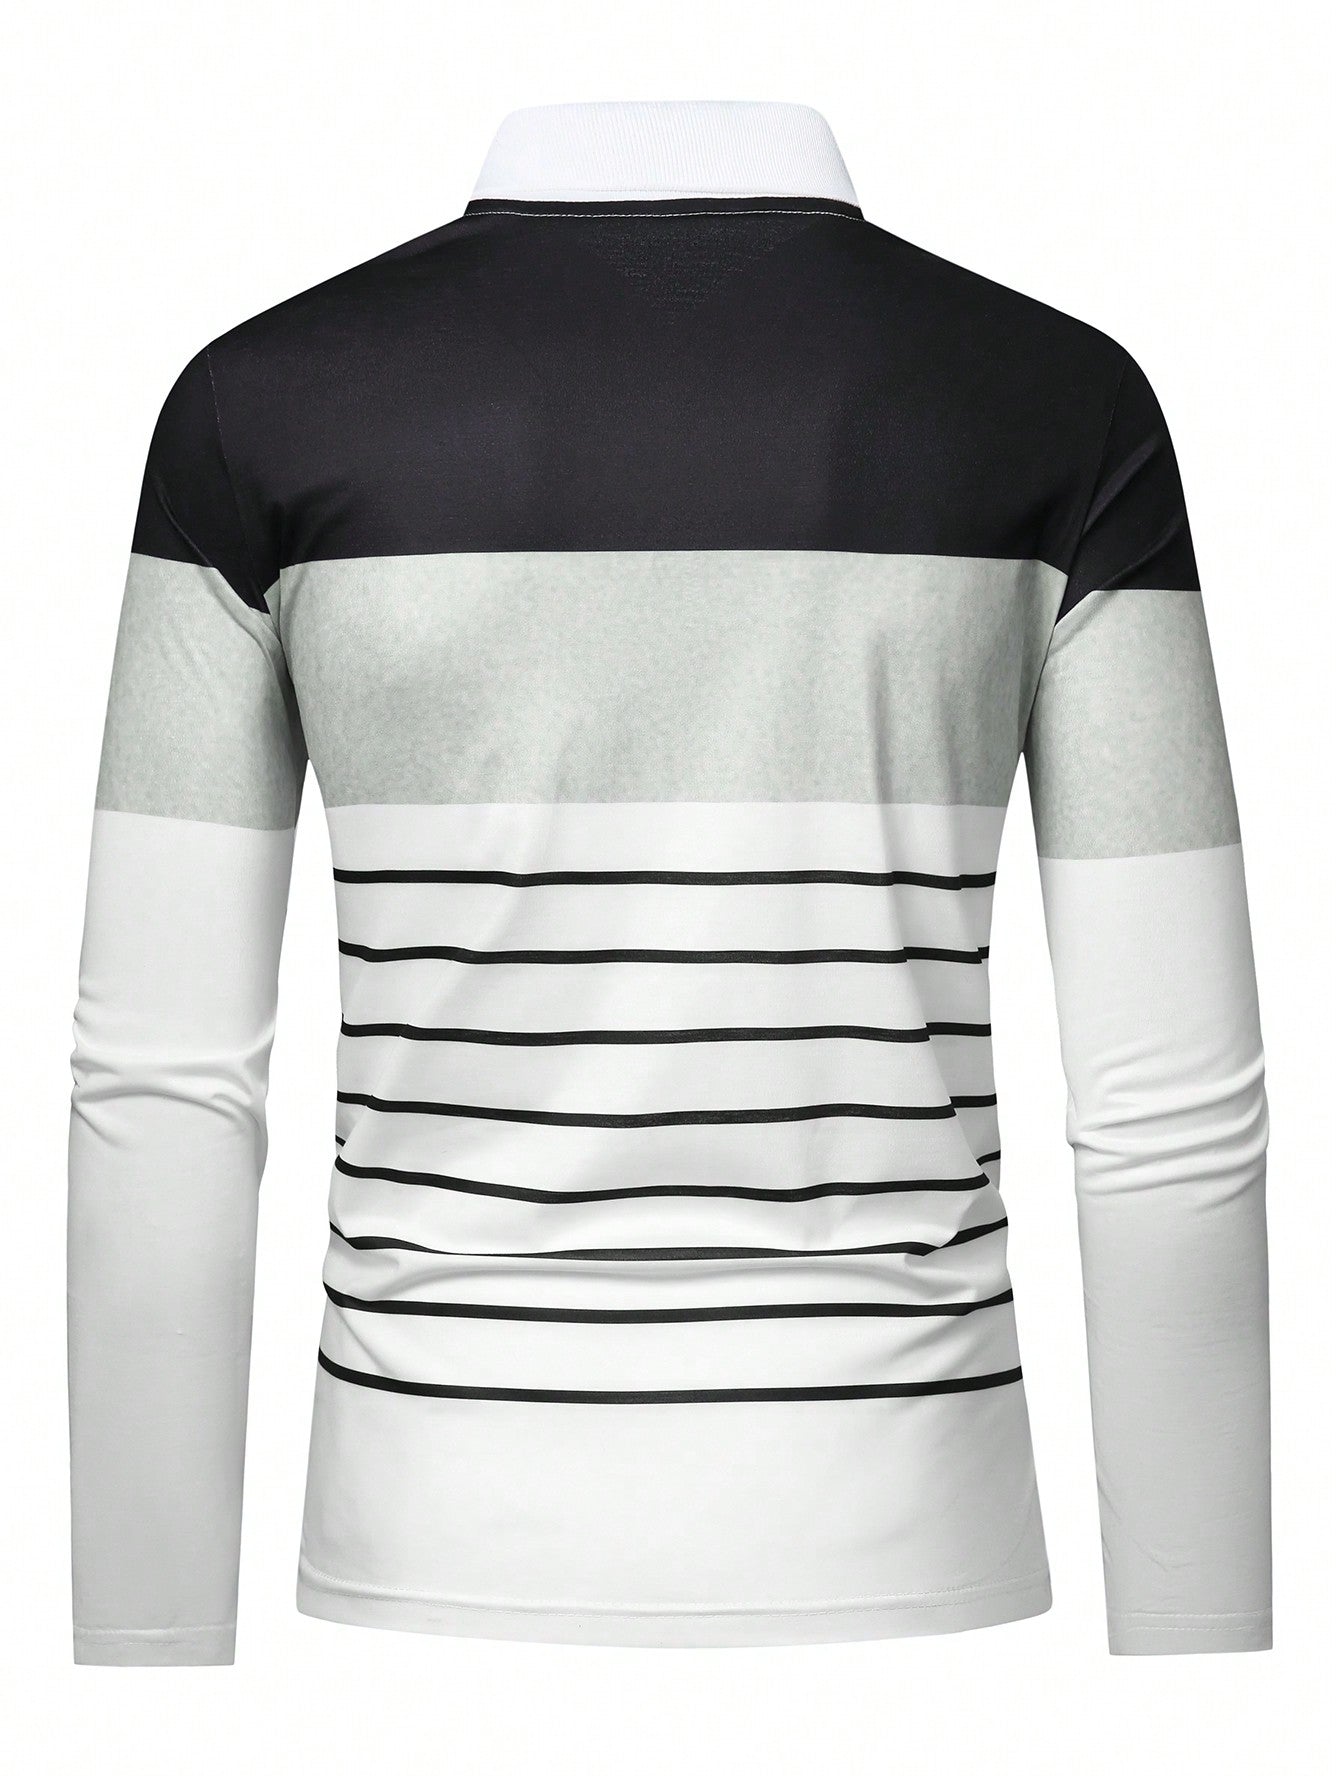 Manfinity Homme Men'S Color Block Striped Long Sleeve Polo Shirt